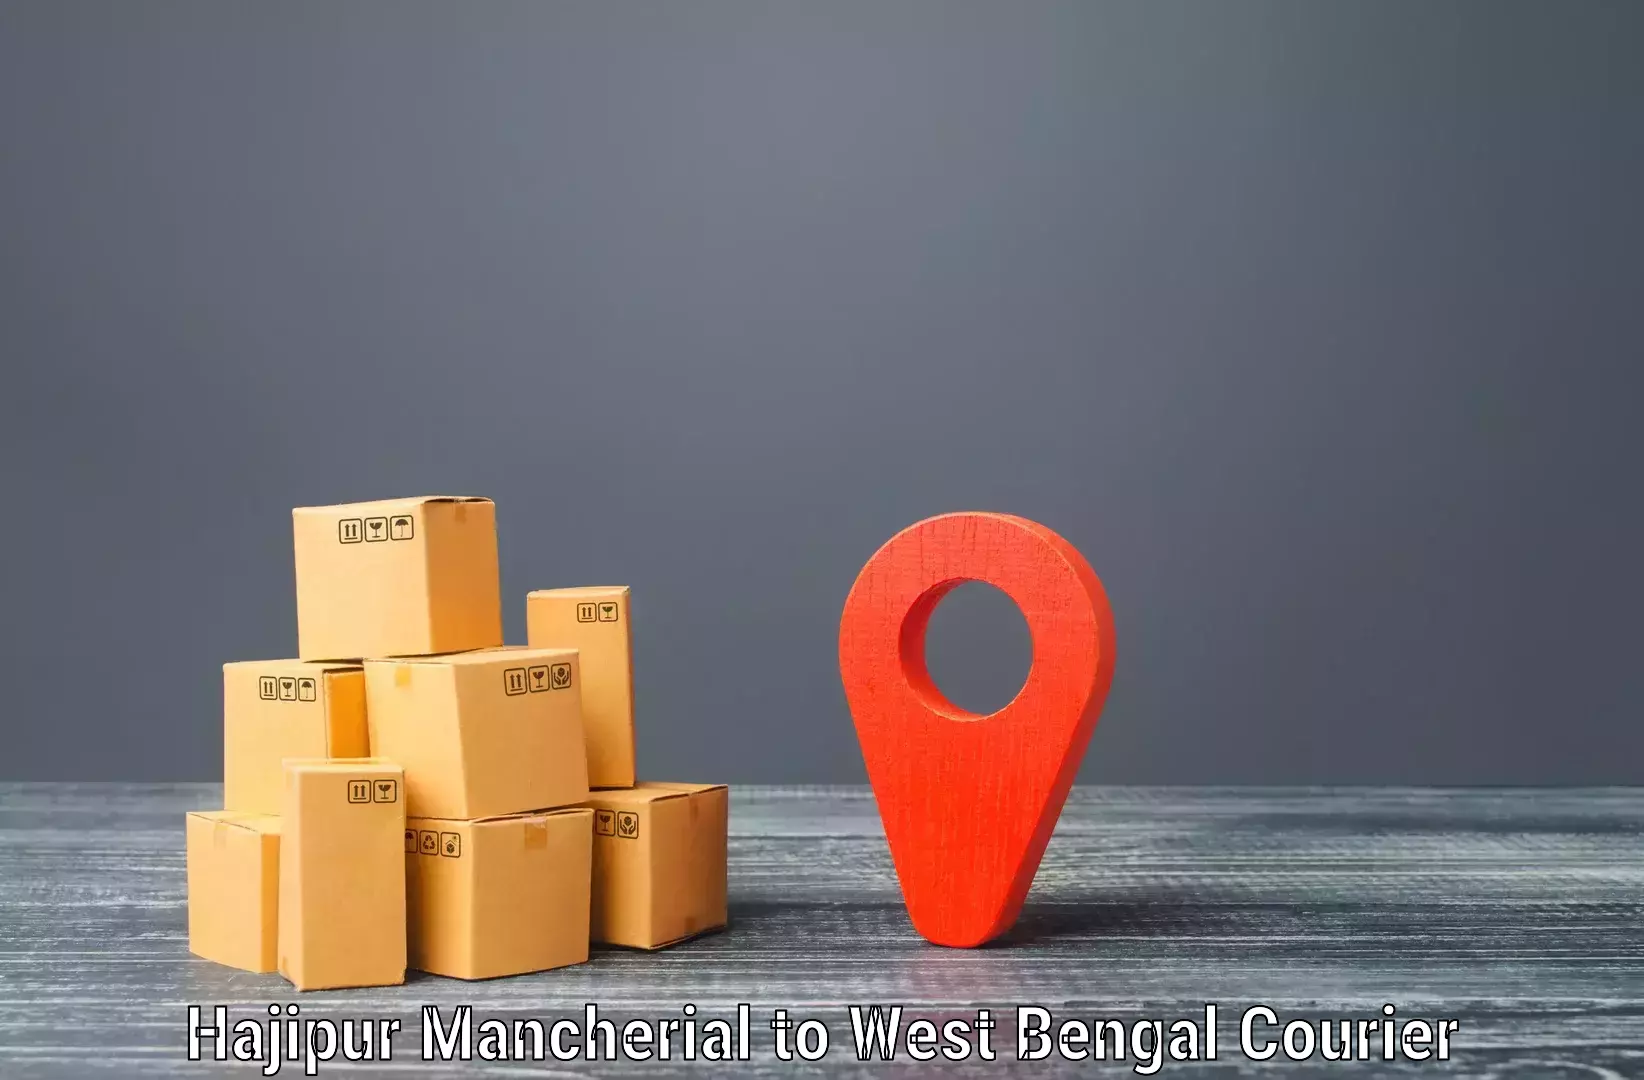 Expedited shipping solutions Hajipur Mancherial to Budge Budge